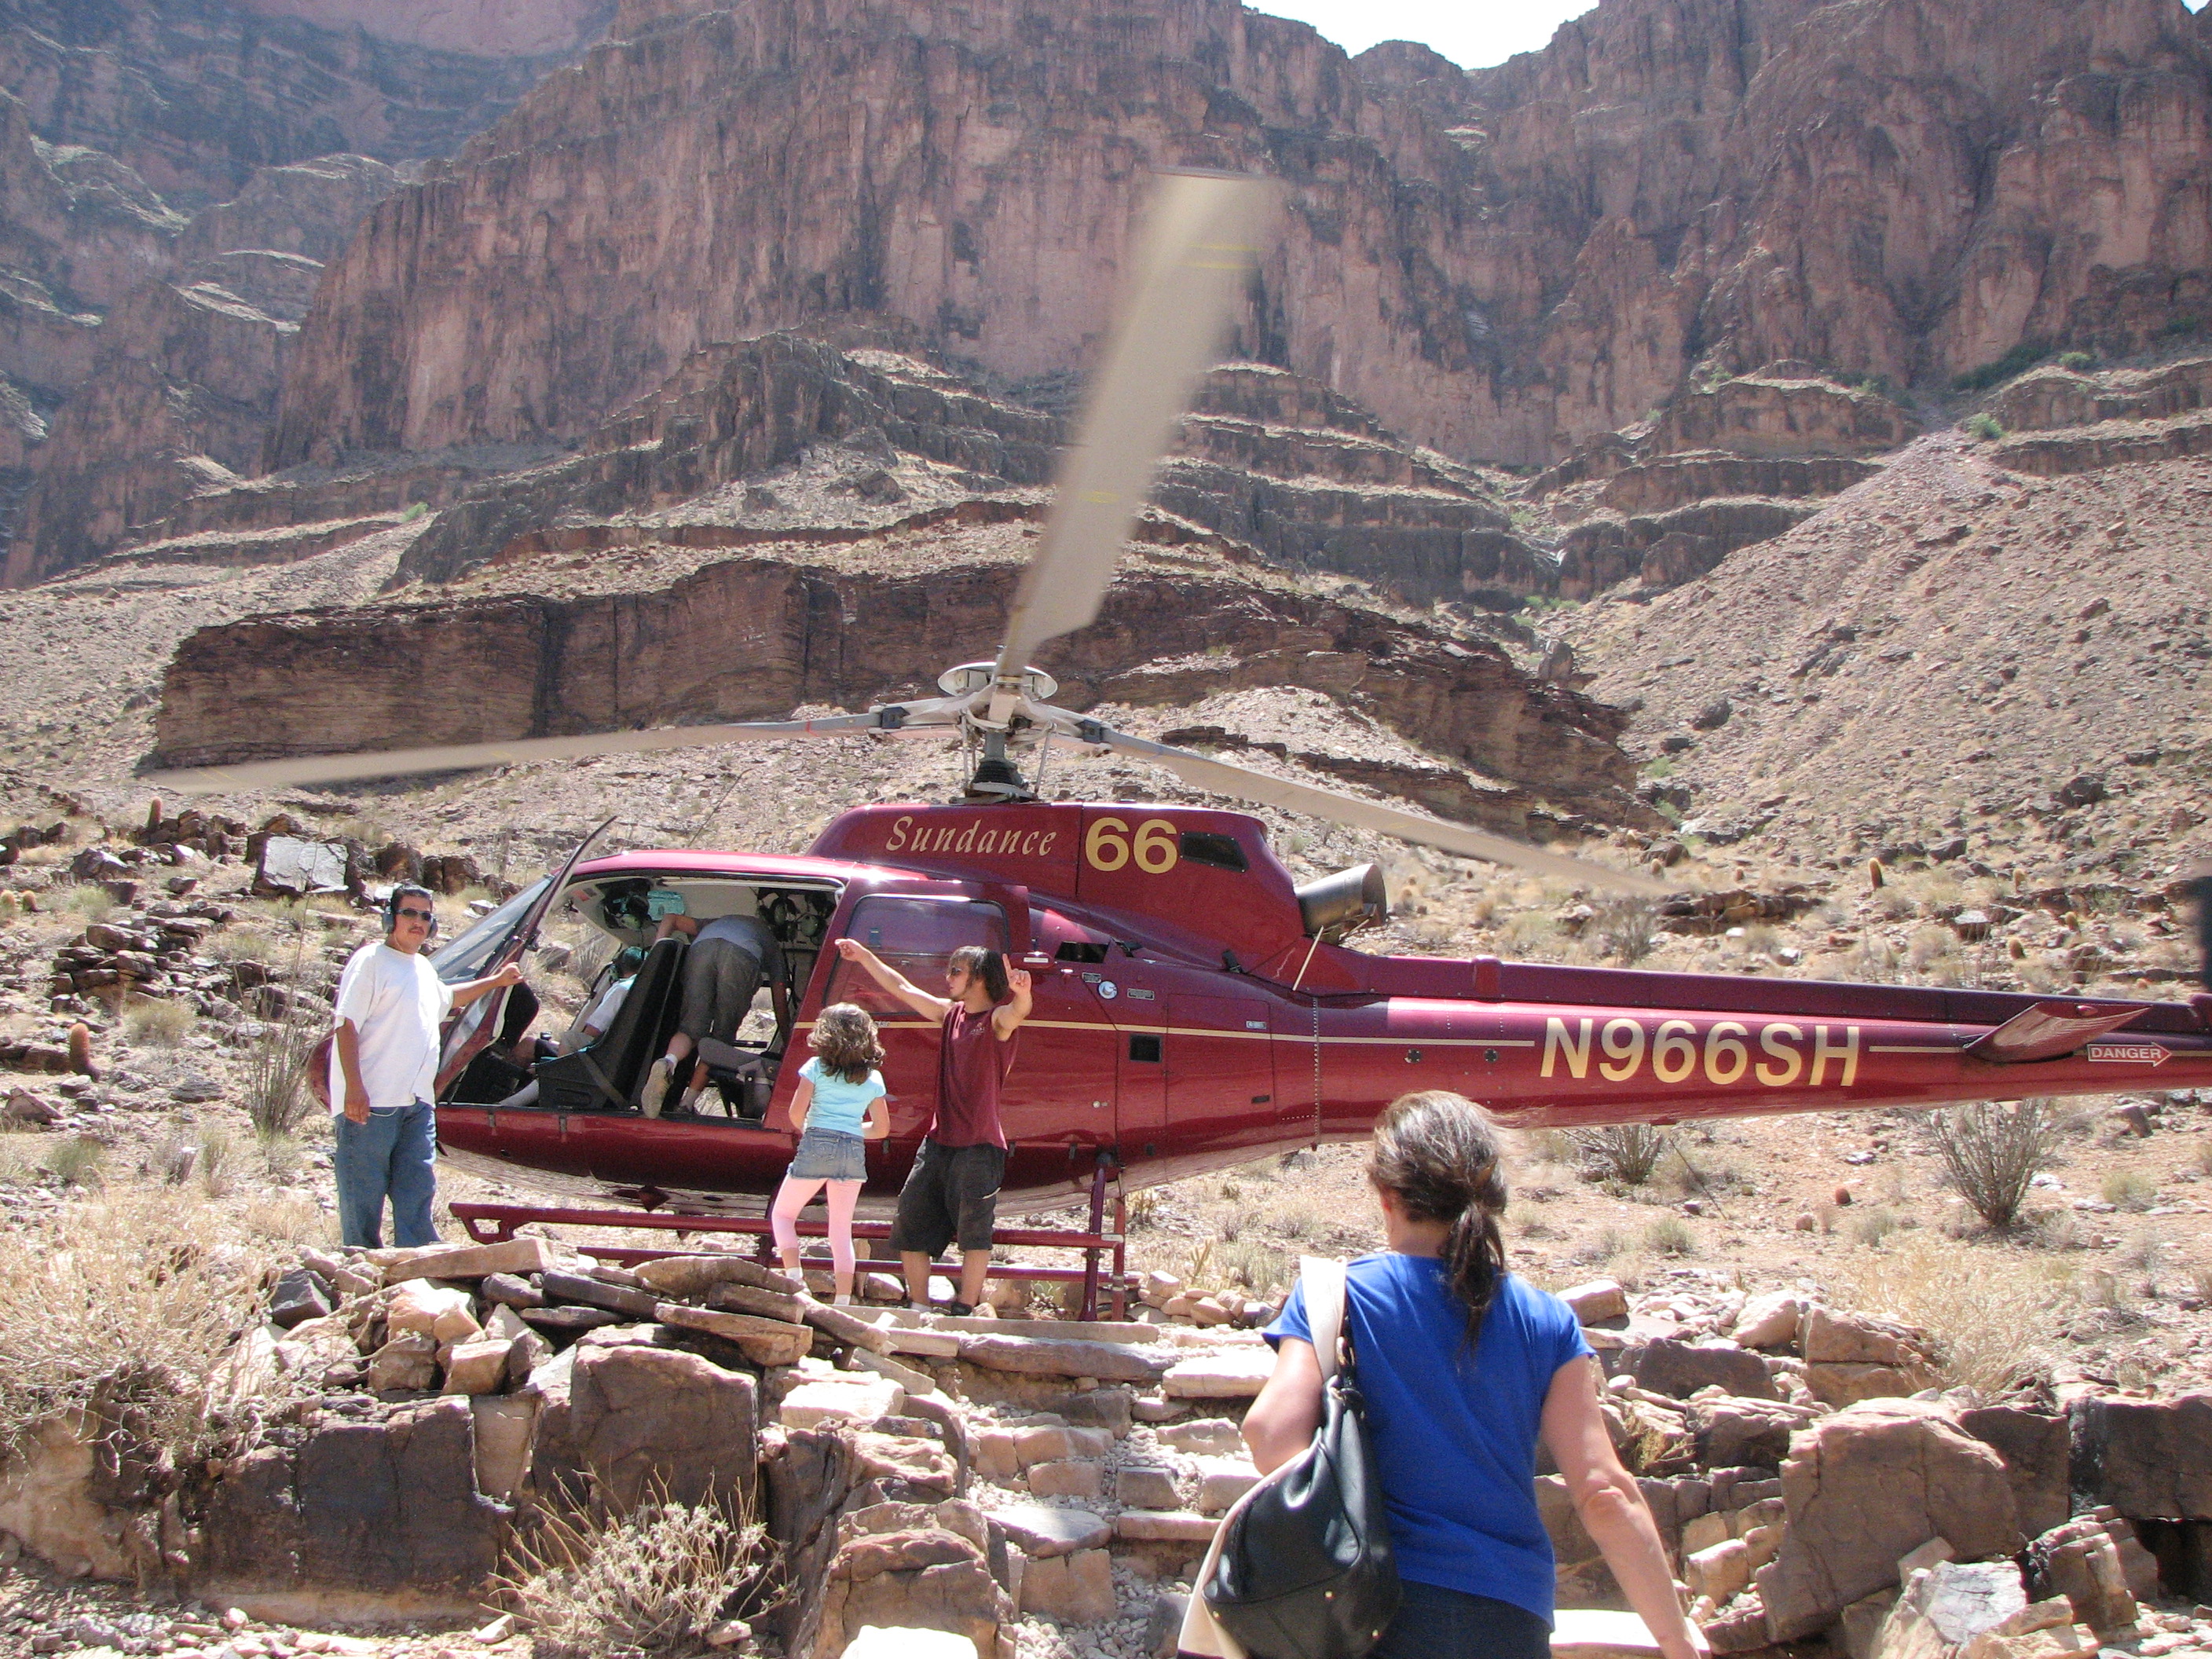 Taking a helicopter down Grand Canyon